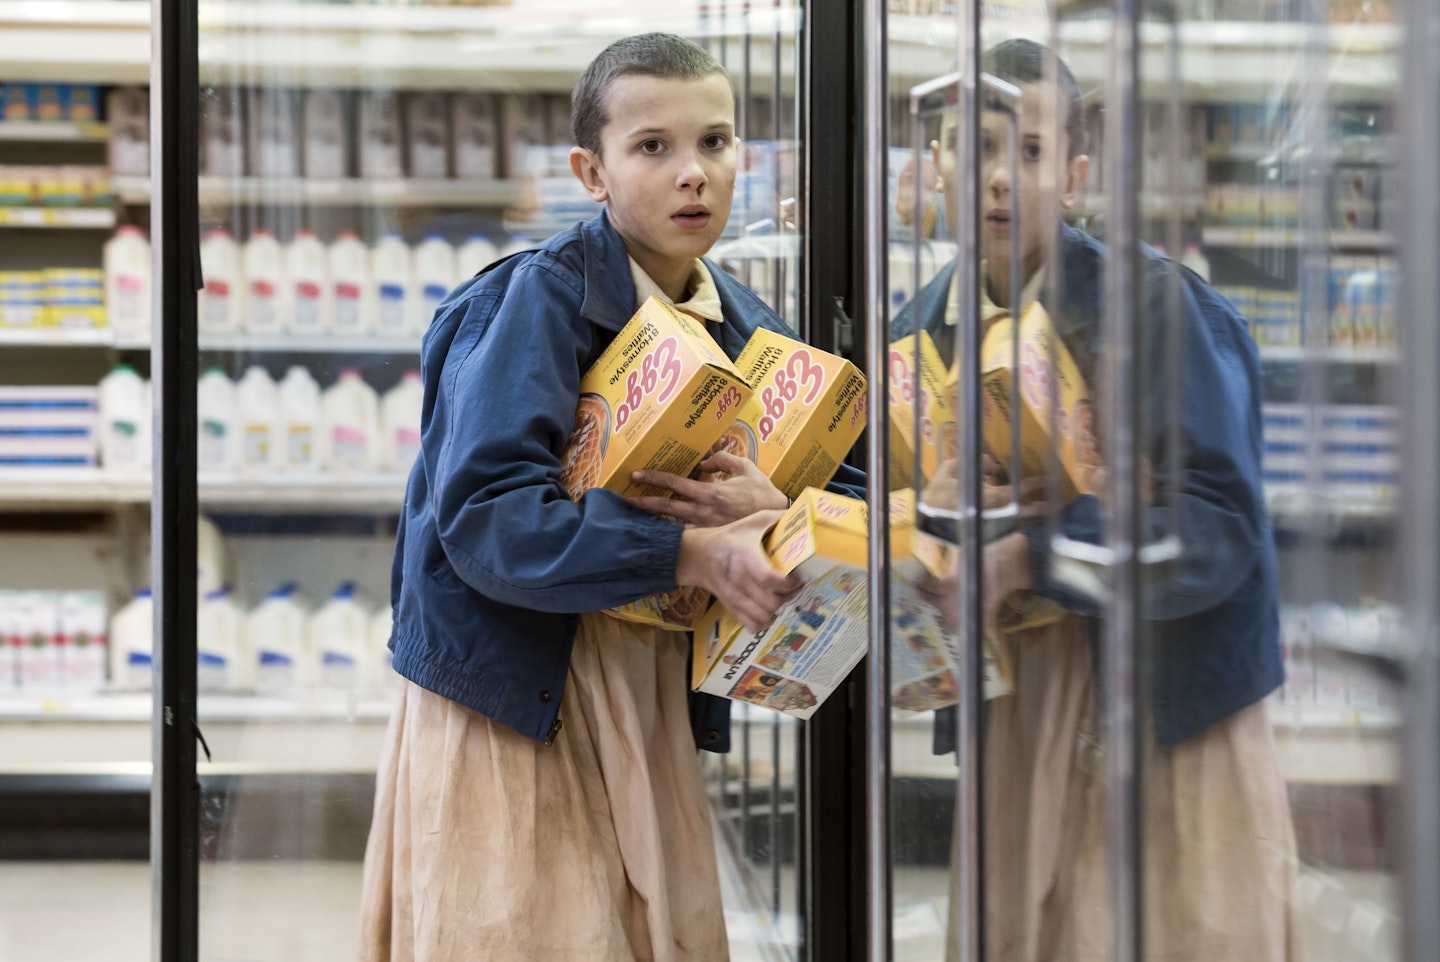 Eleven shoplifting in Stranger Things